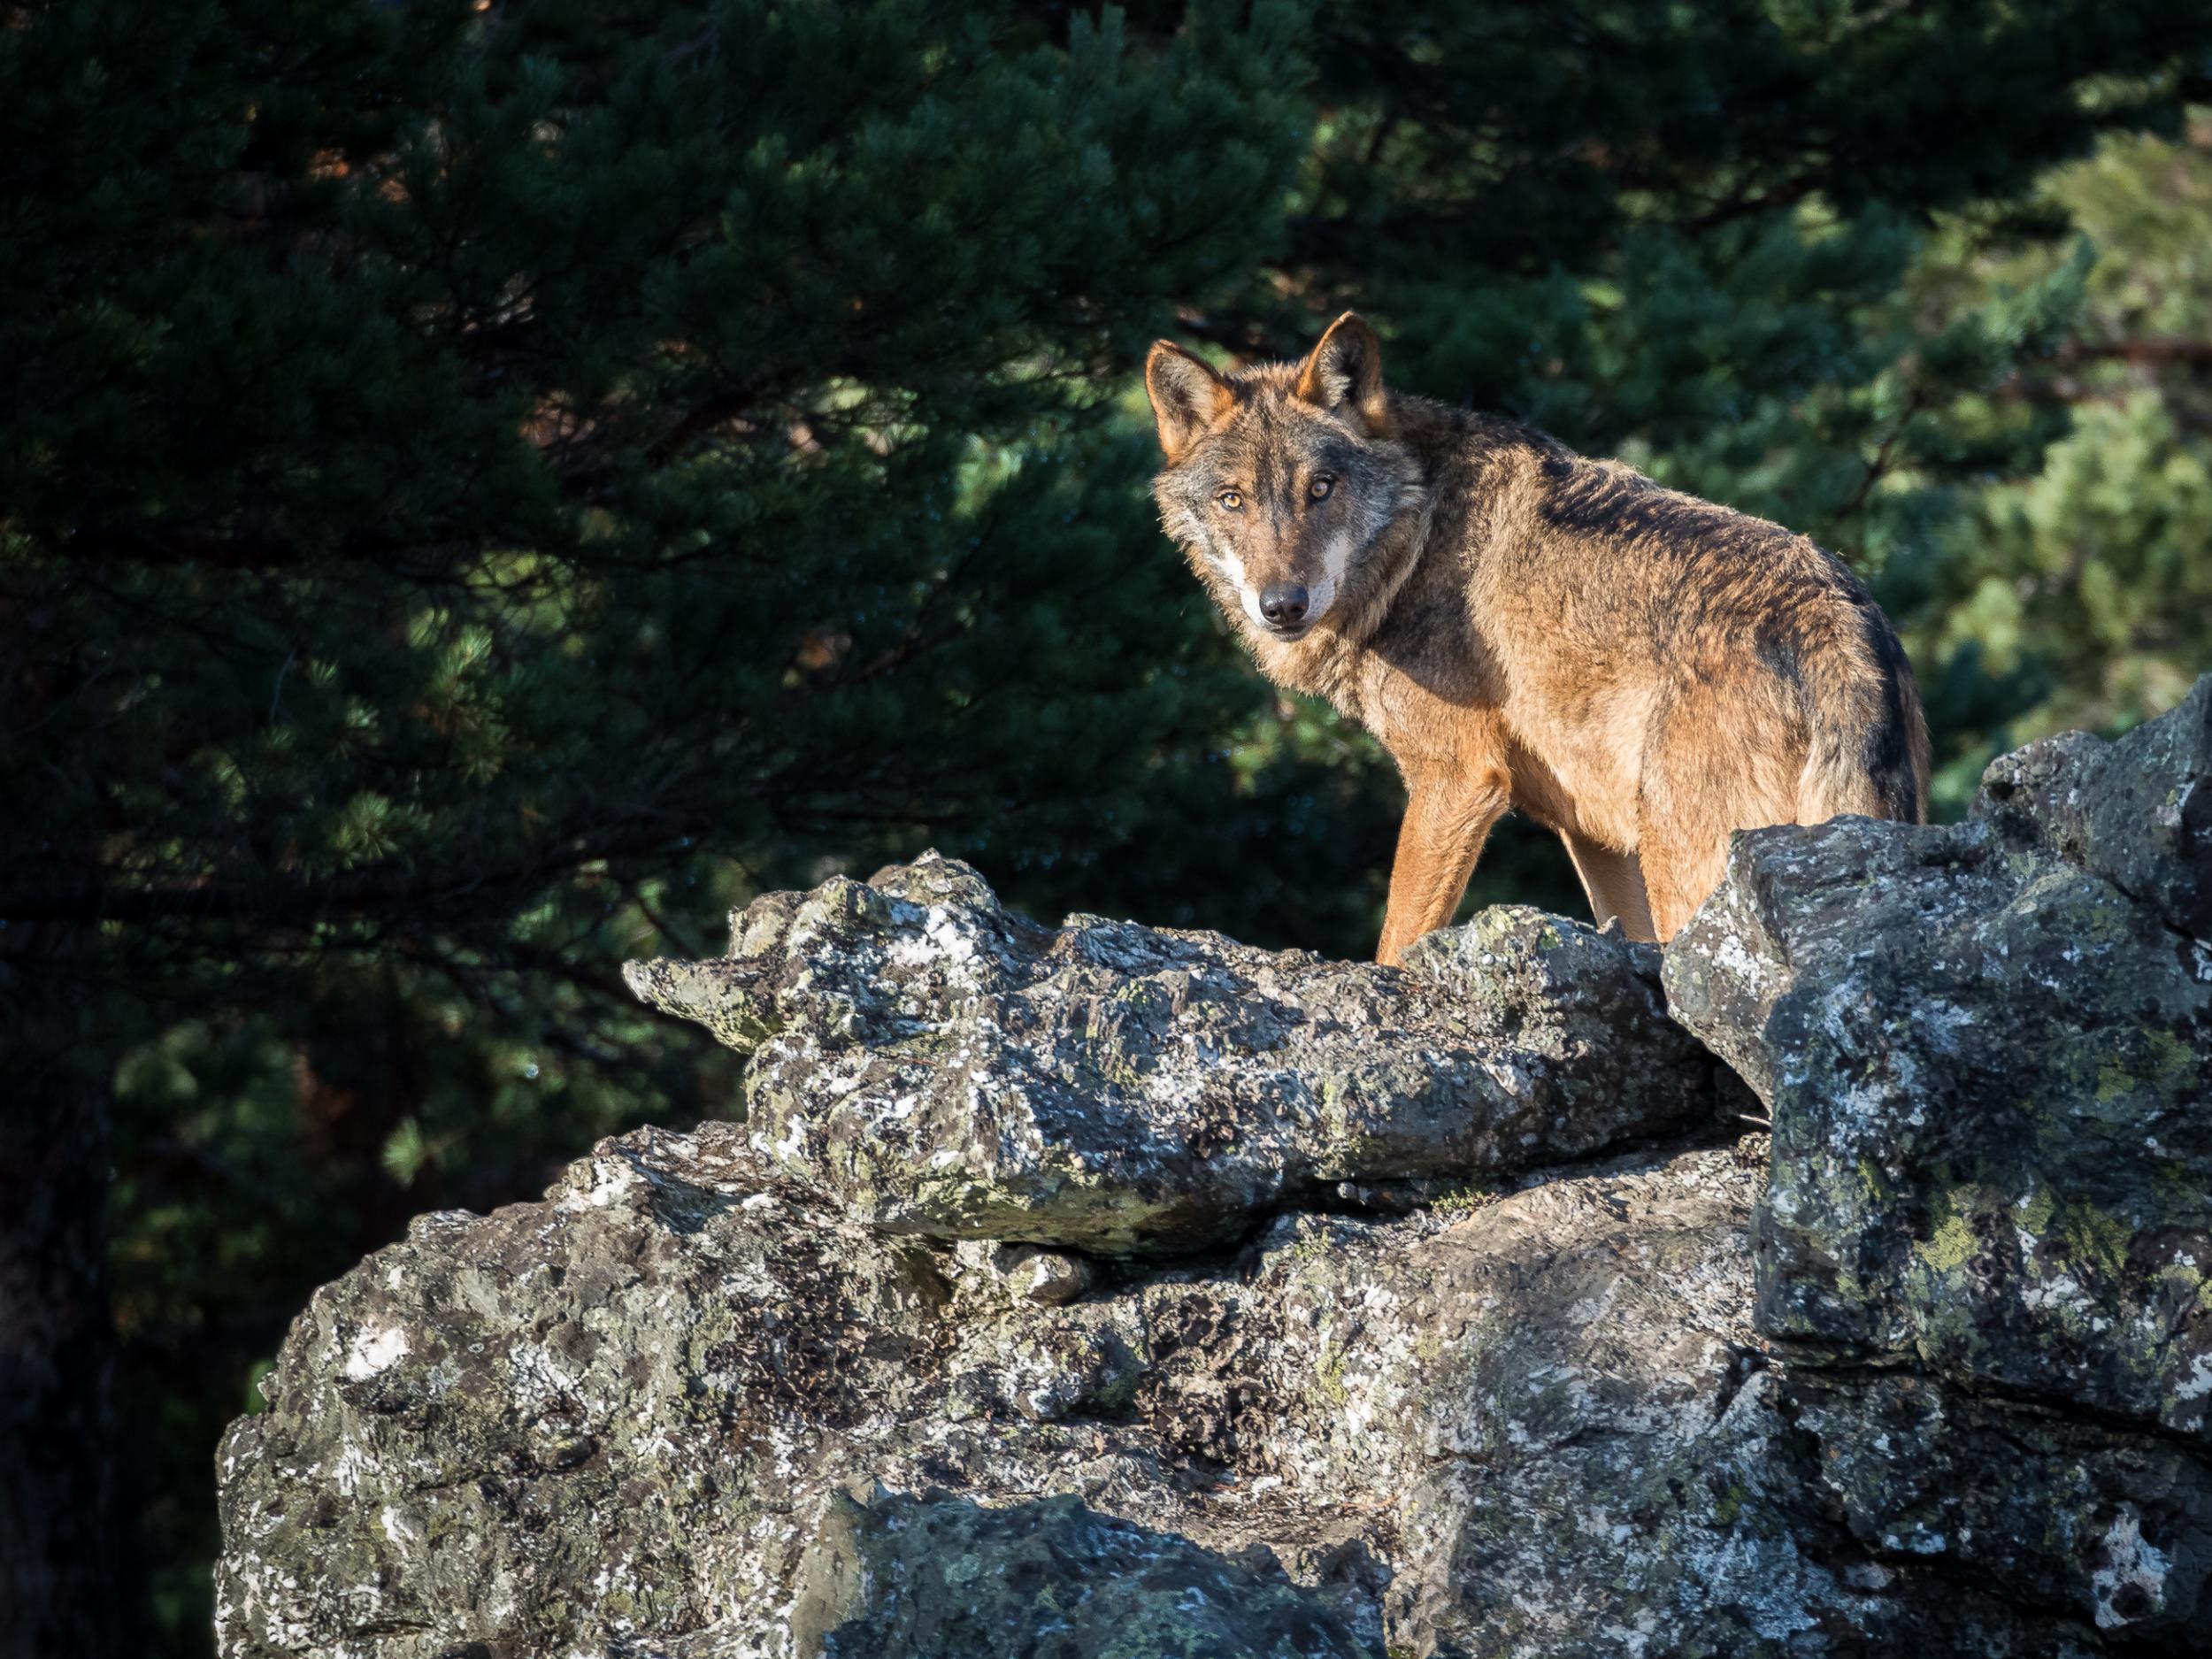 Northern Spain’s wild landscapes host Iberian wolves